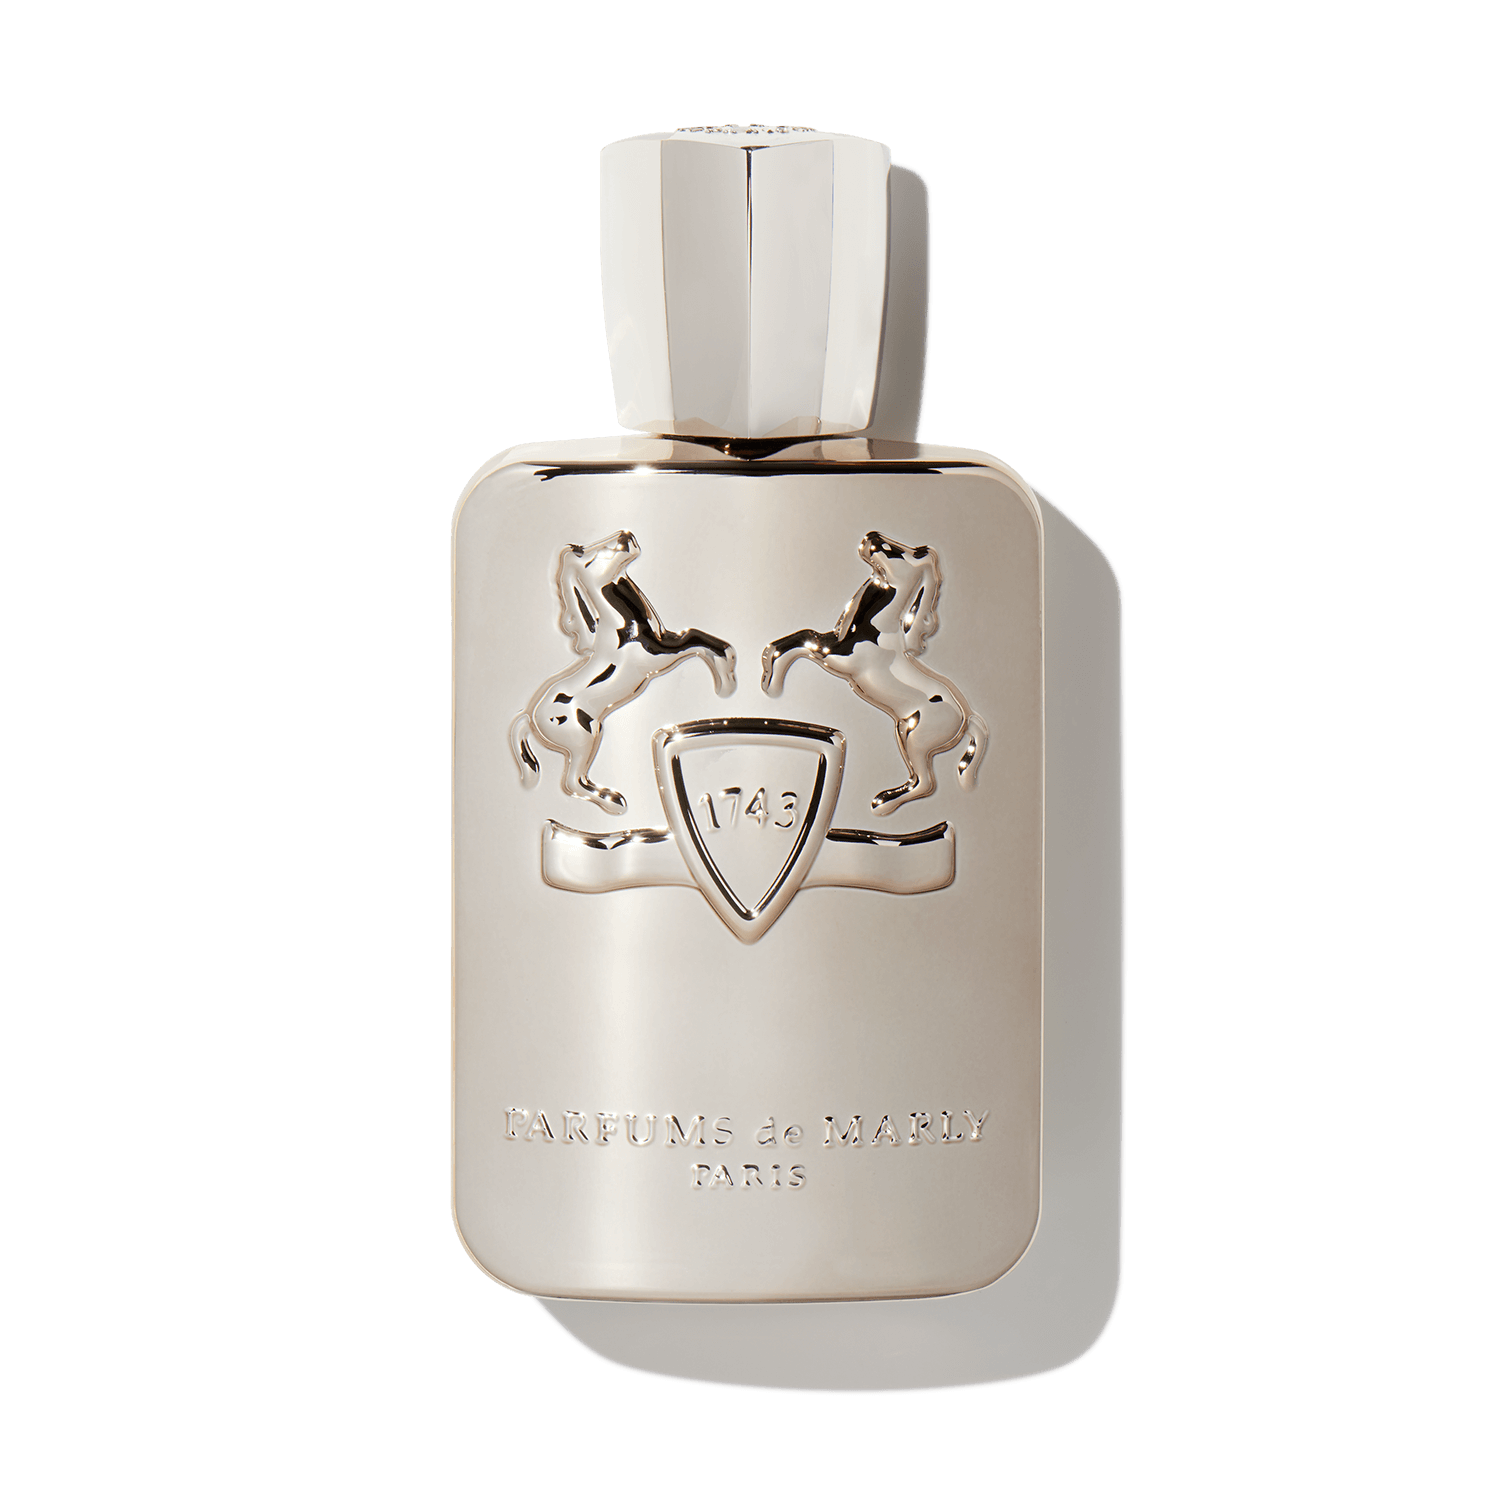 LAYTON - The iconic fragrance by Parfums de Marly 